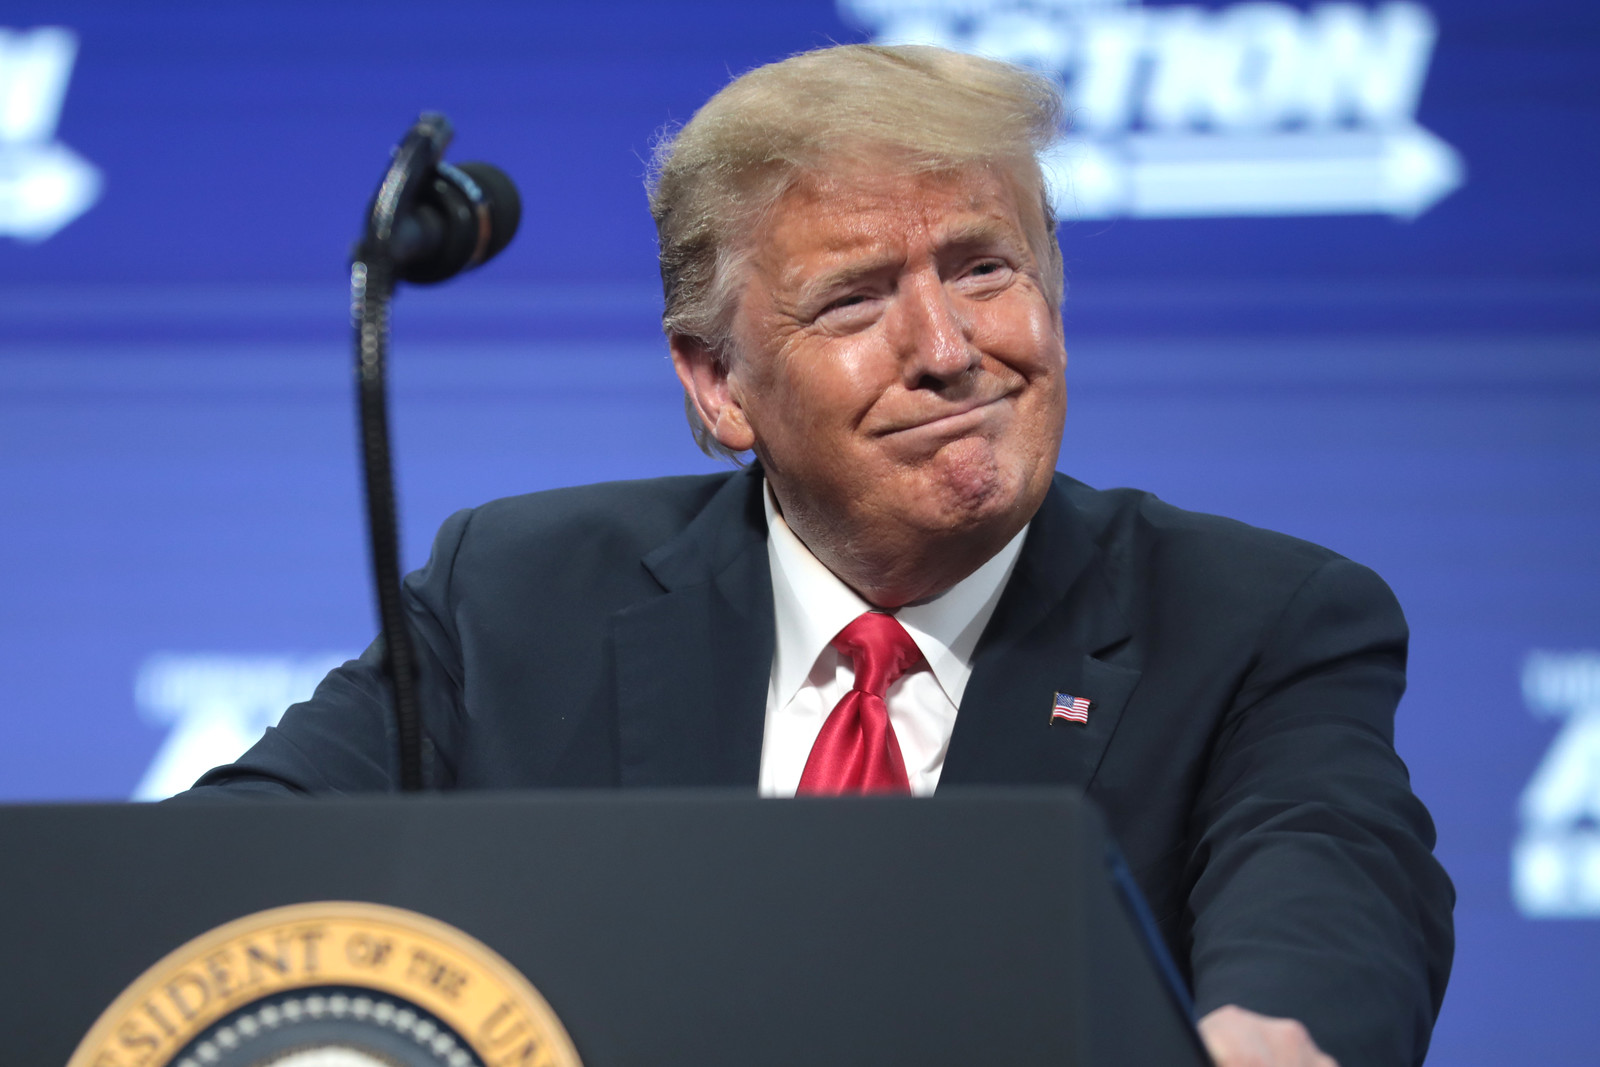 Trump wins CPAC straw poll, revs up campaign speculation amid Biden polling collapse